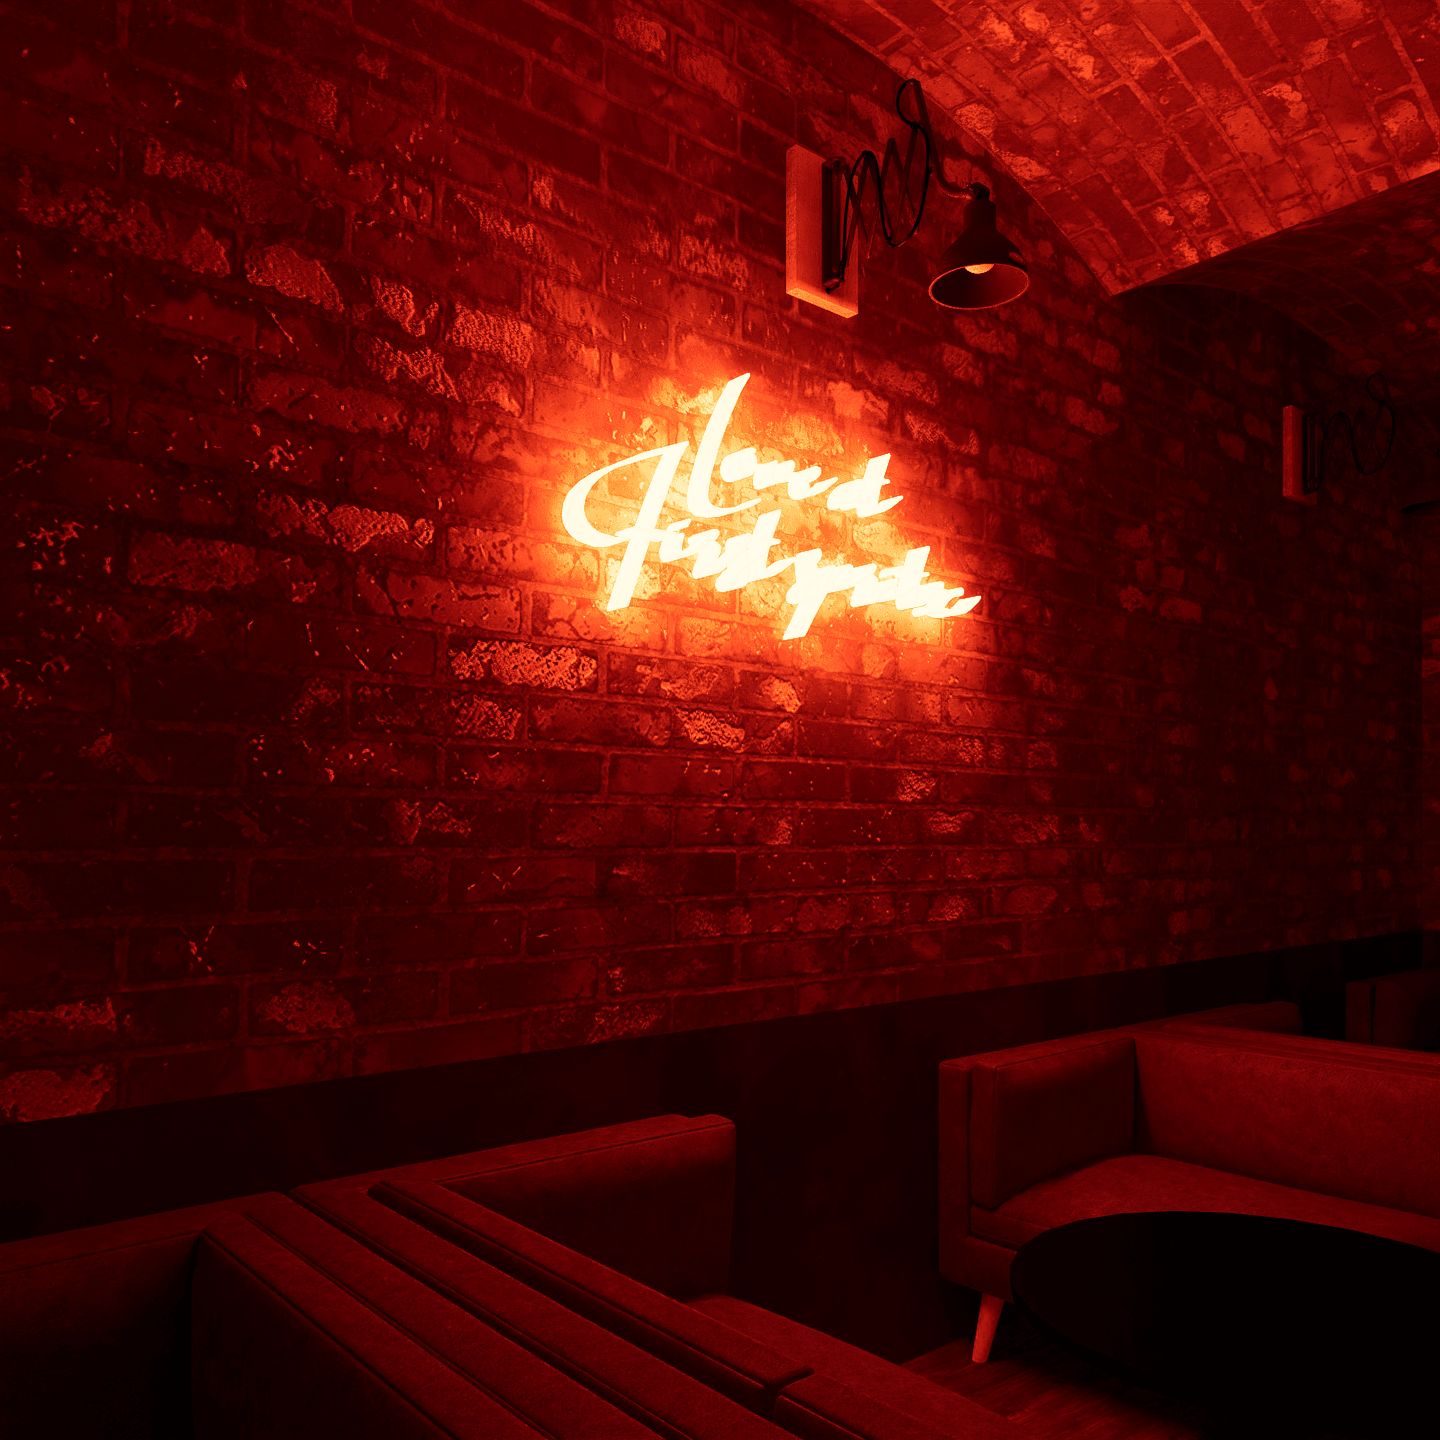 dark-night-lit-red-neon-lights-hanging-on-the-wall-for-display-love-at-first-spritz